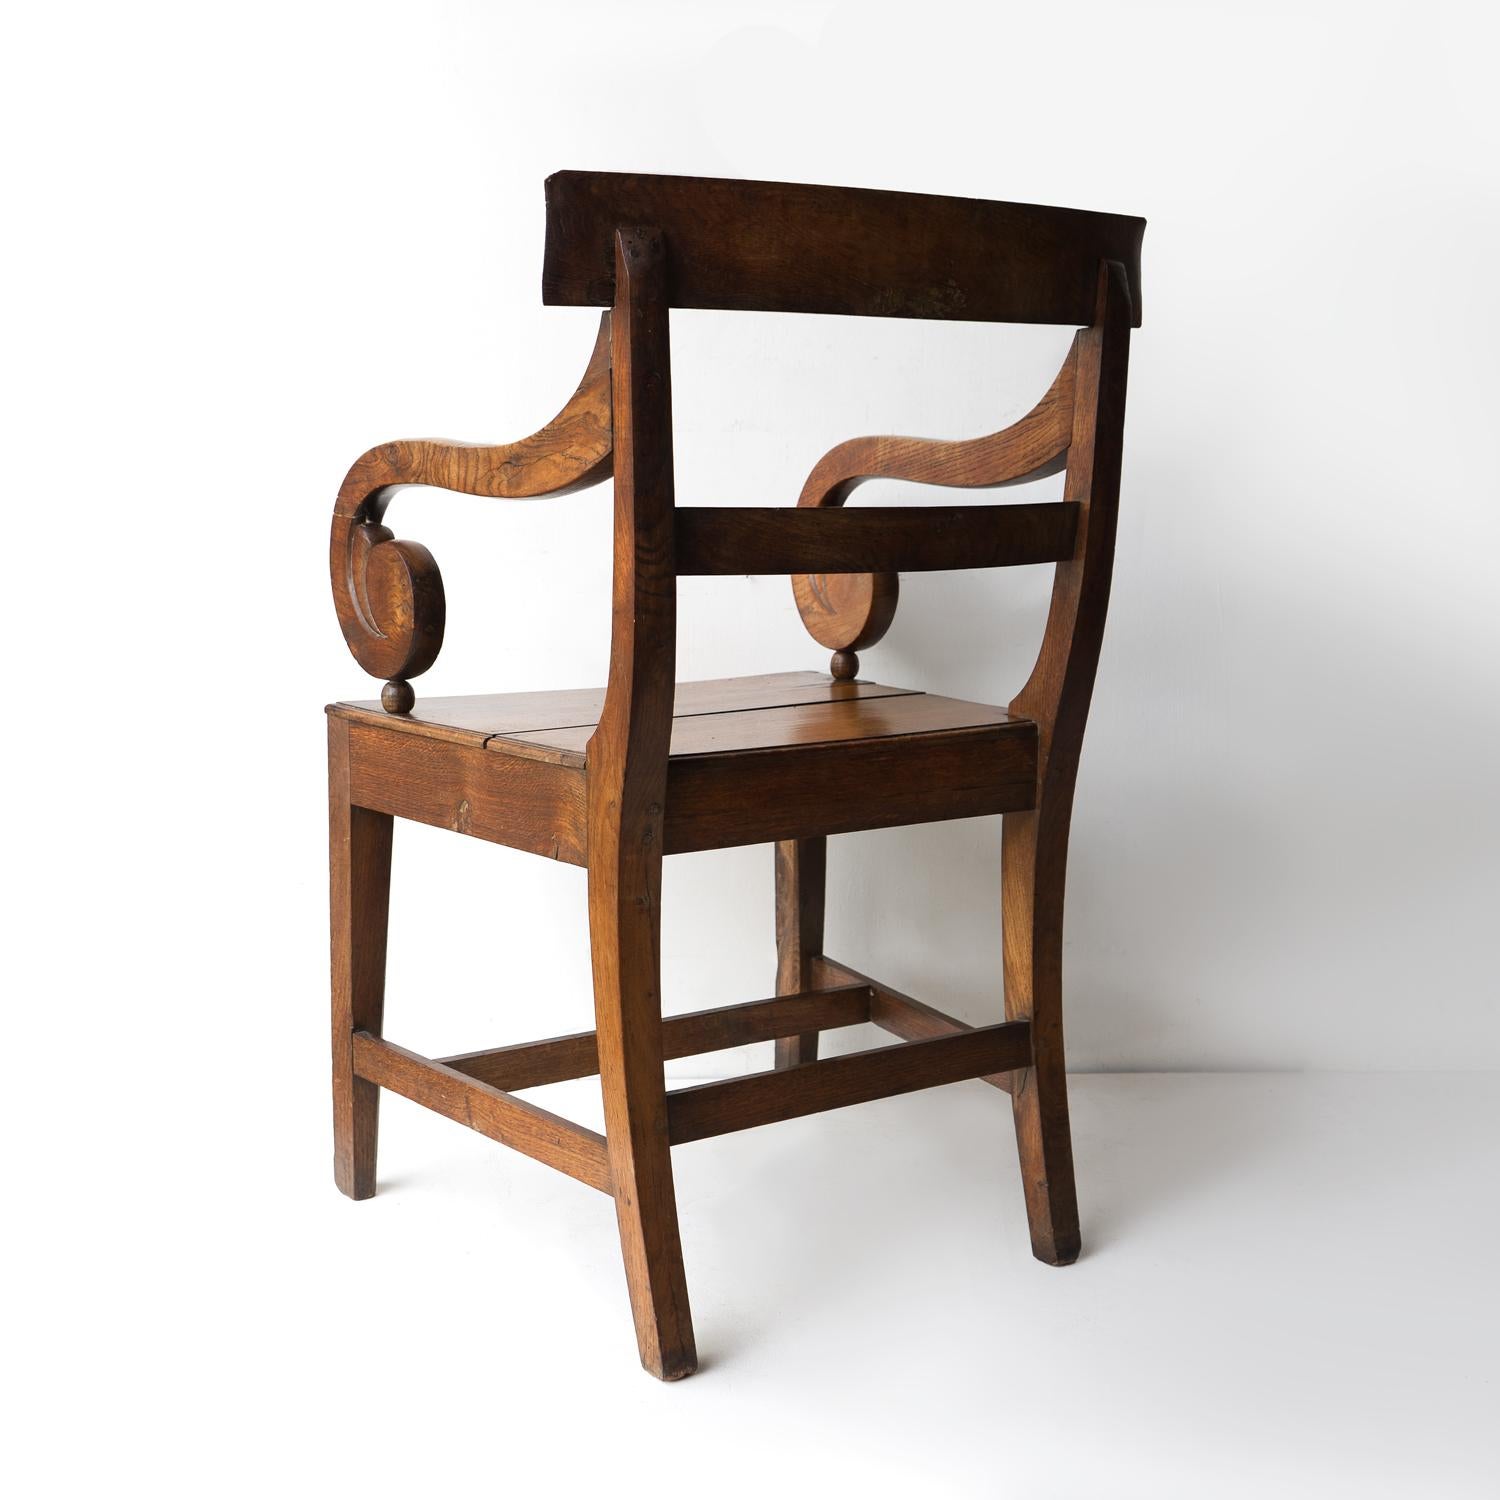 Antique Regency Oak Scroll Armchair, Early 19th Century Elbow Chair In Good Condition For Sale In Bristol, GB